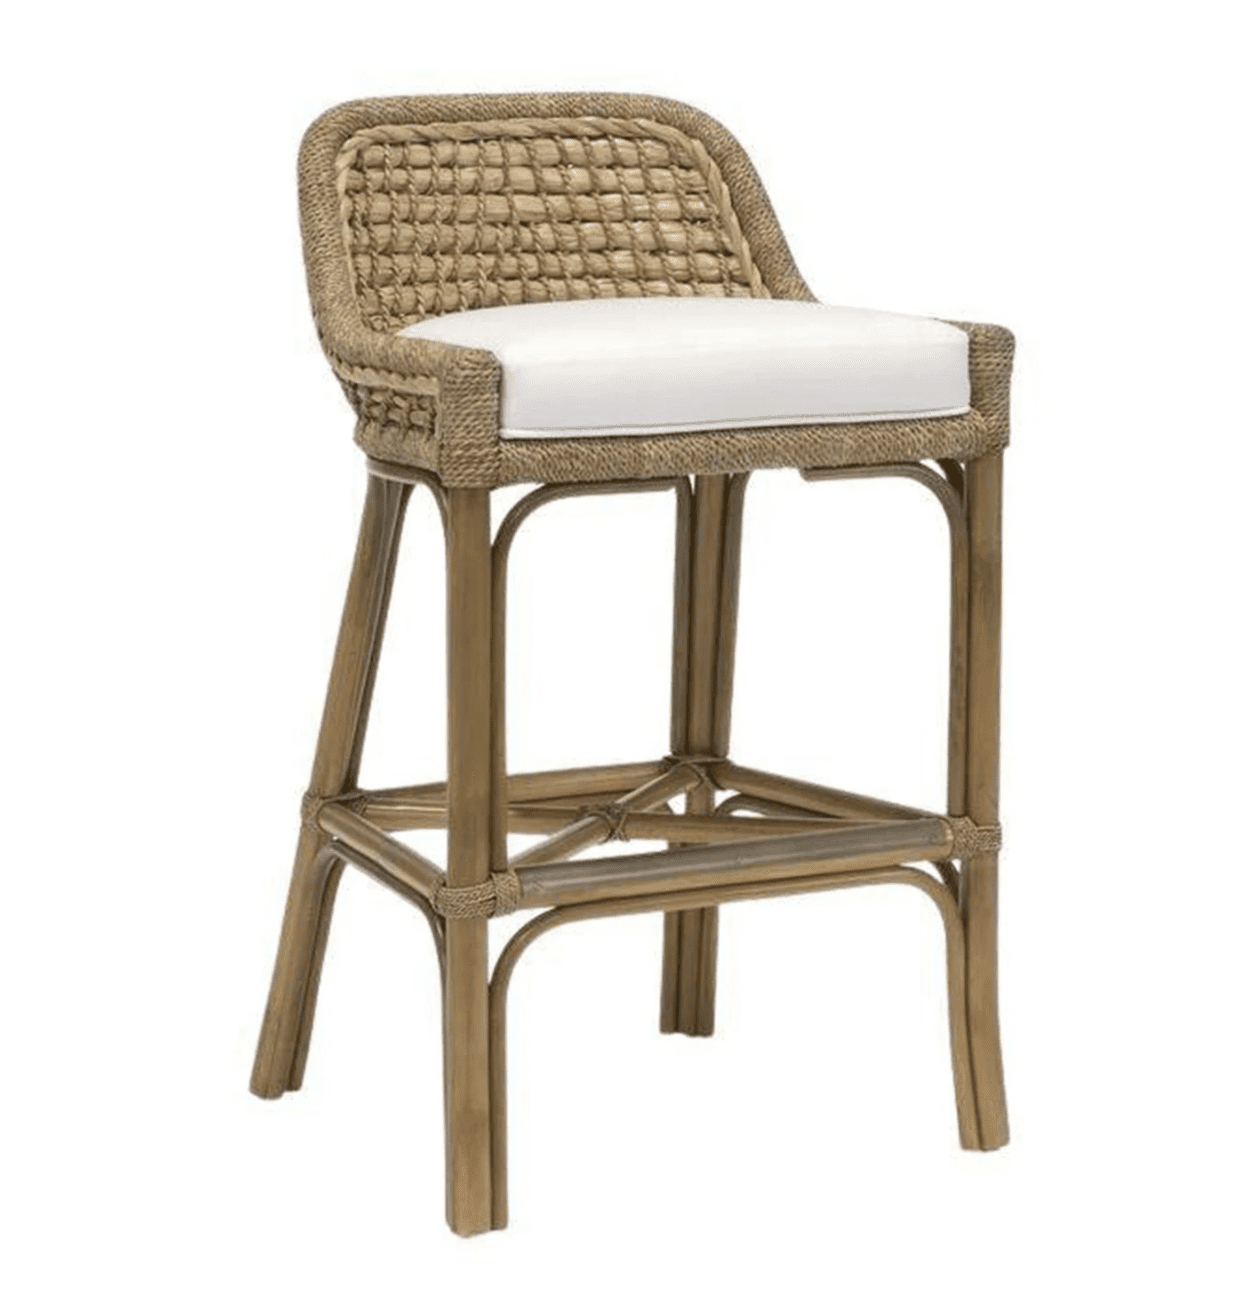 Rattan and Seagrass Bar Stool